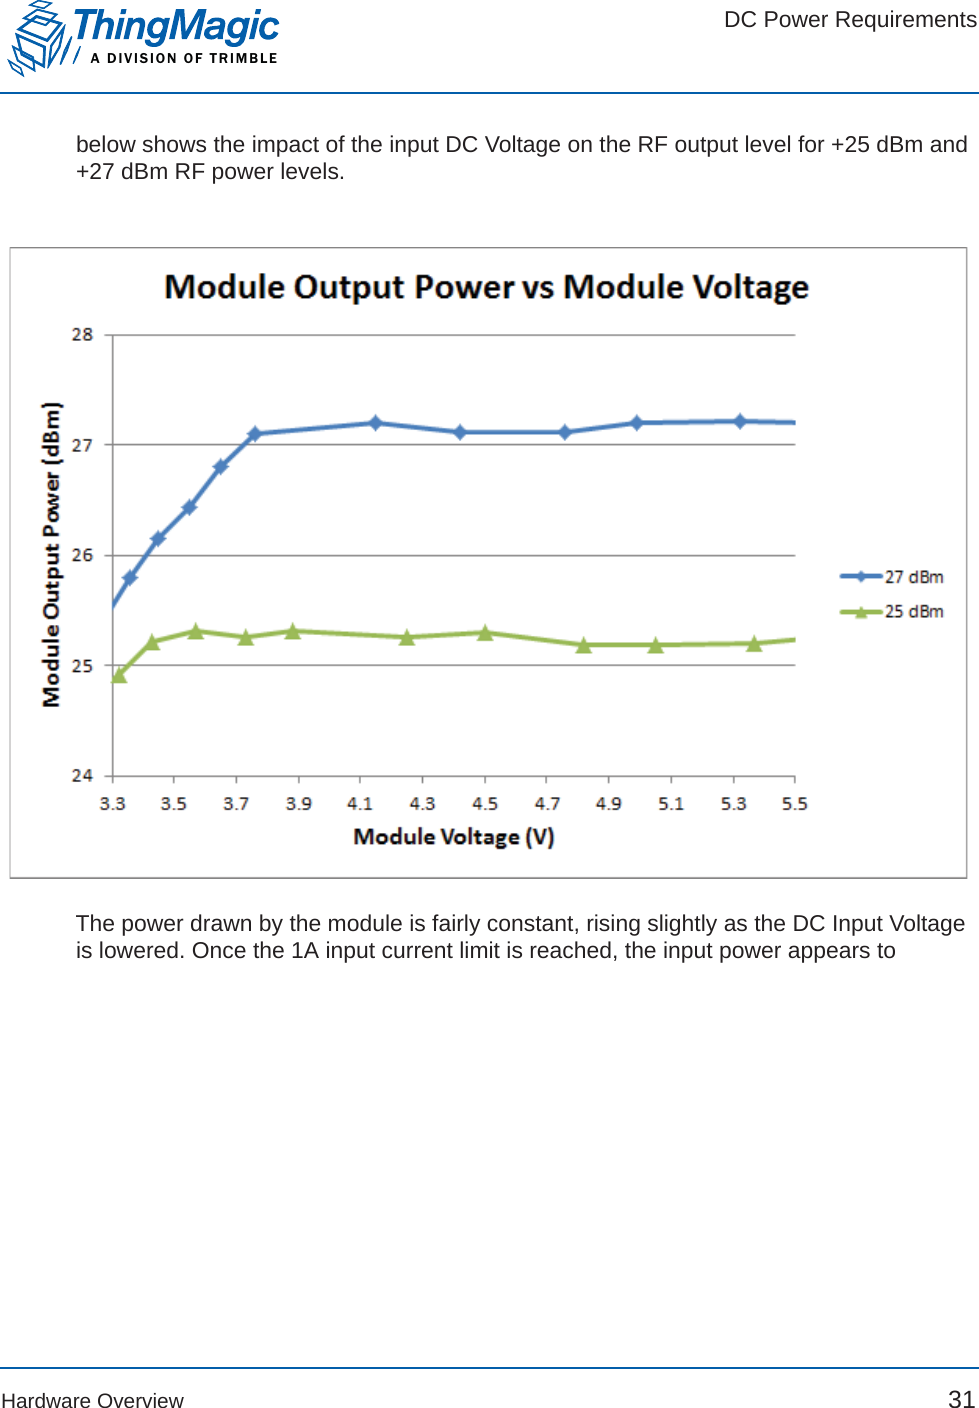 DC Power RequirementsA DIVISION OF TRIMBLEHardware Overview 31below shows the impact of the input DC Voltage on the RF output level for +25 dBm and +27 dBm RF power levels.The power drawn by the module is fairly constant, rising slightly as the DC Input Voltage is lowered. Once the 1A input current limit is reached, the input power appears to 